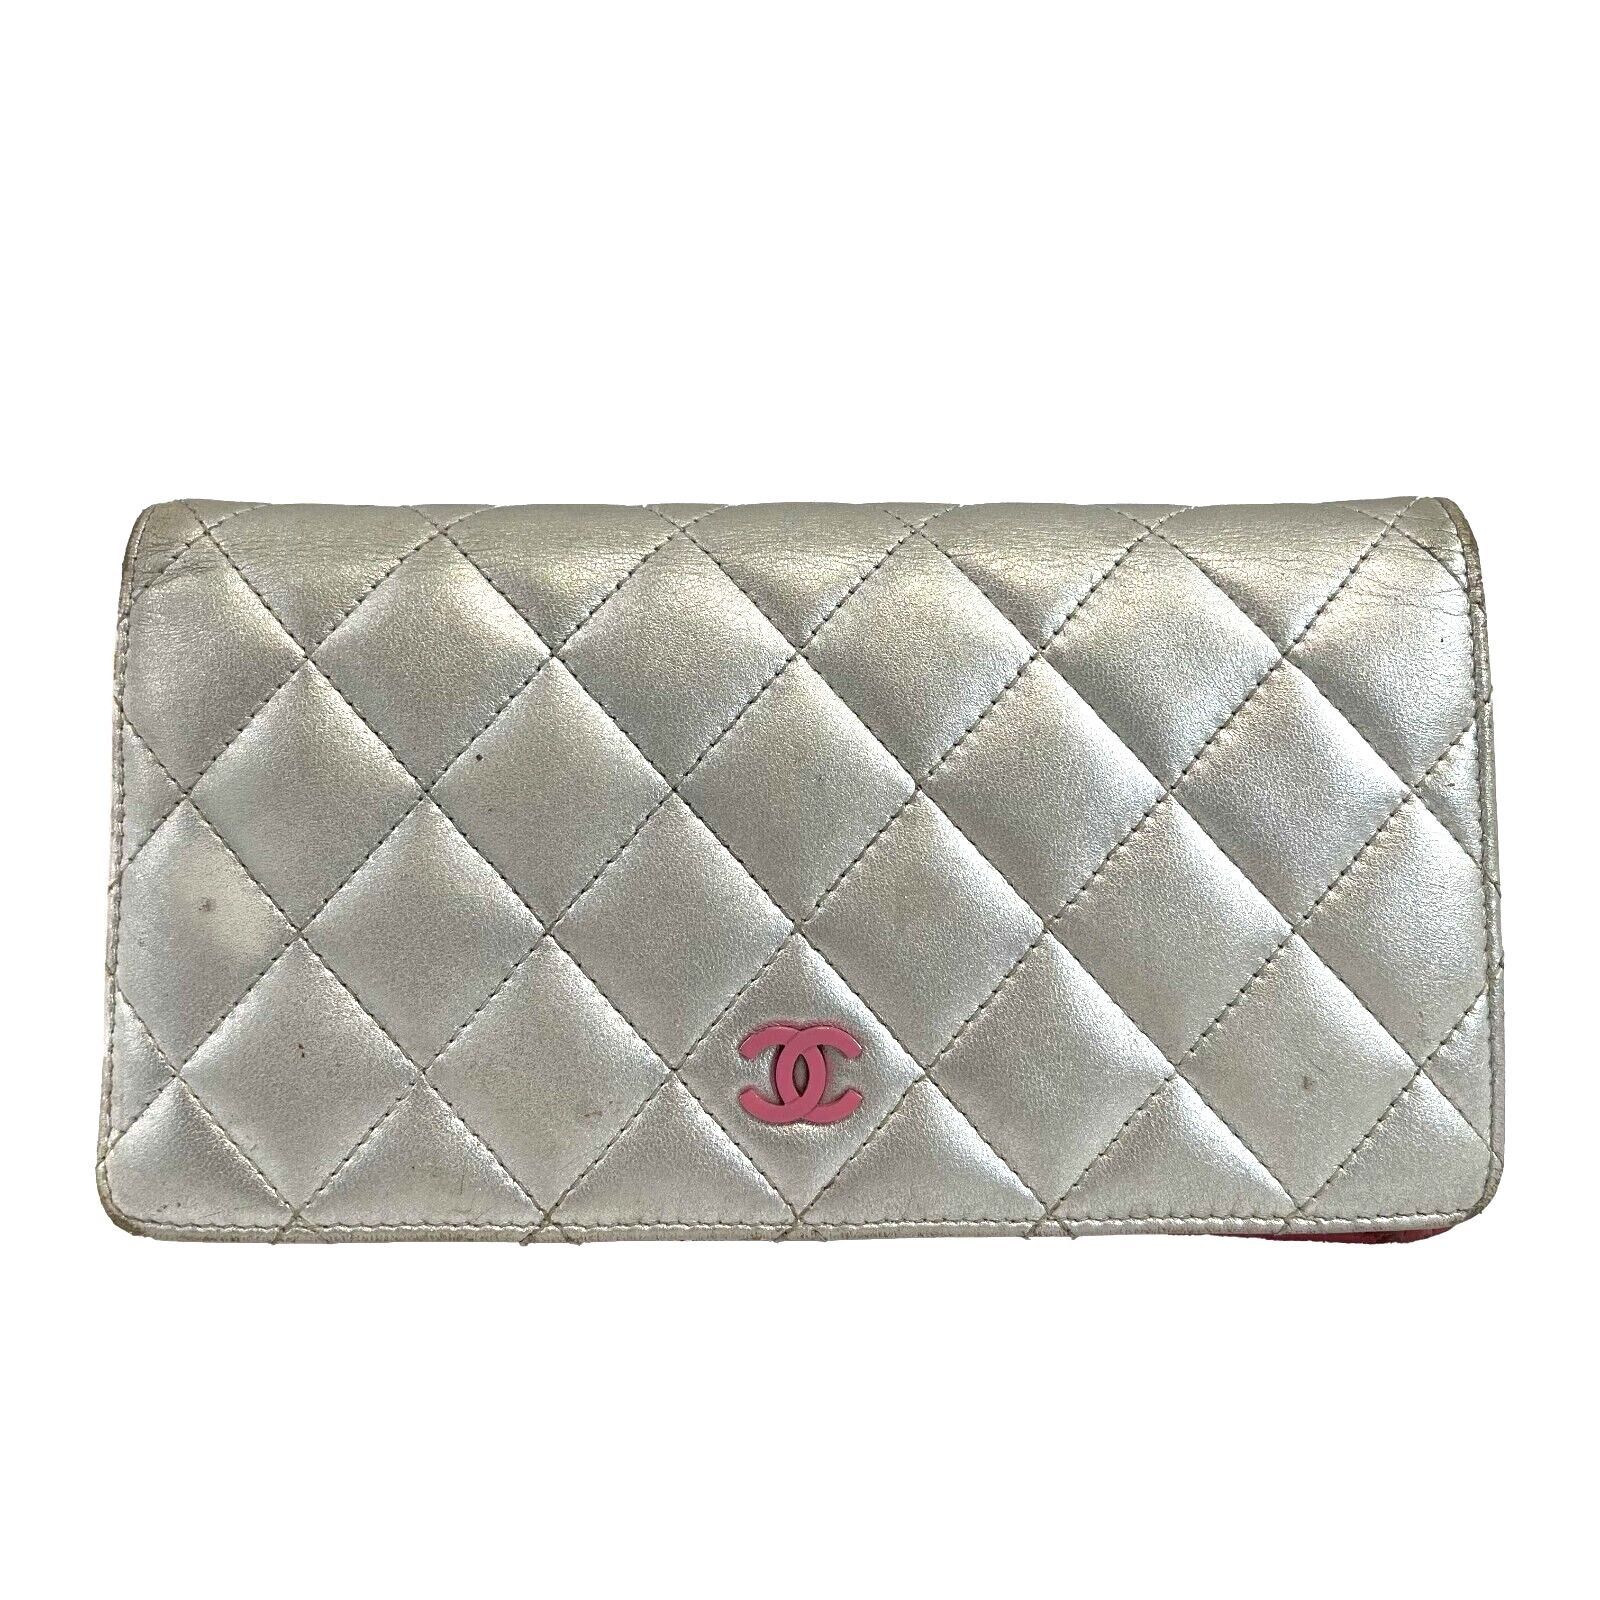 Chanel Black Quilted Cambon Ligne Compact Wallet 3C11117